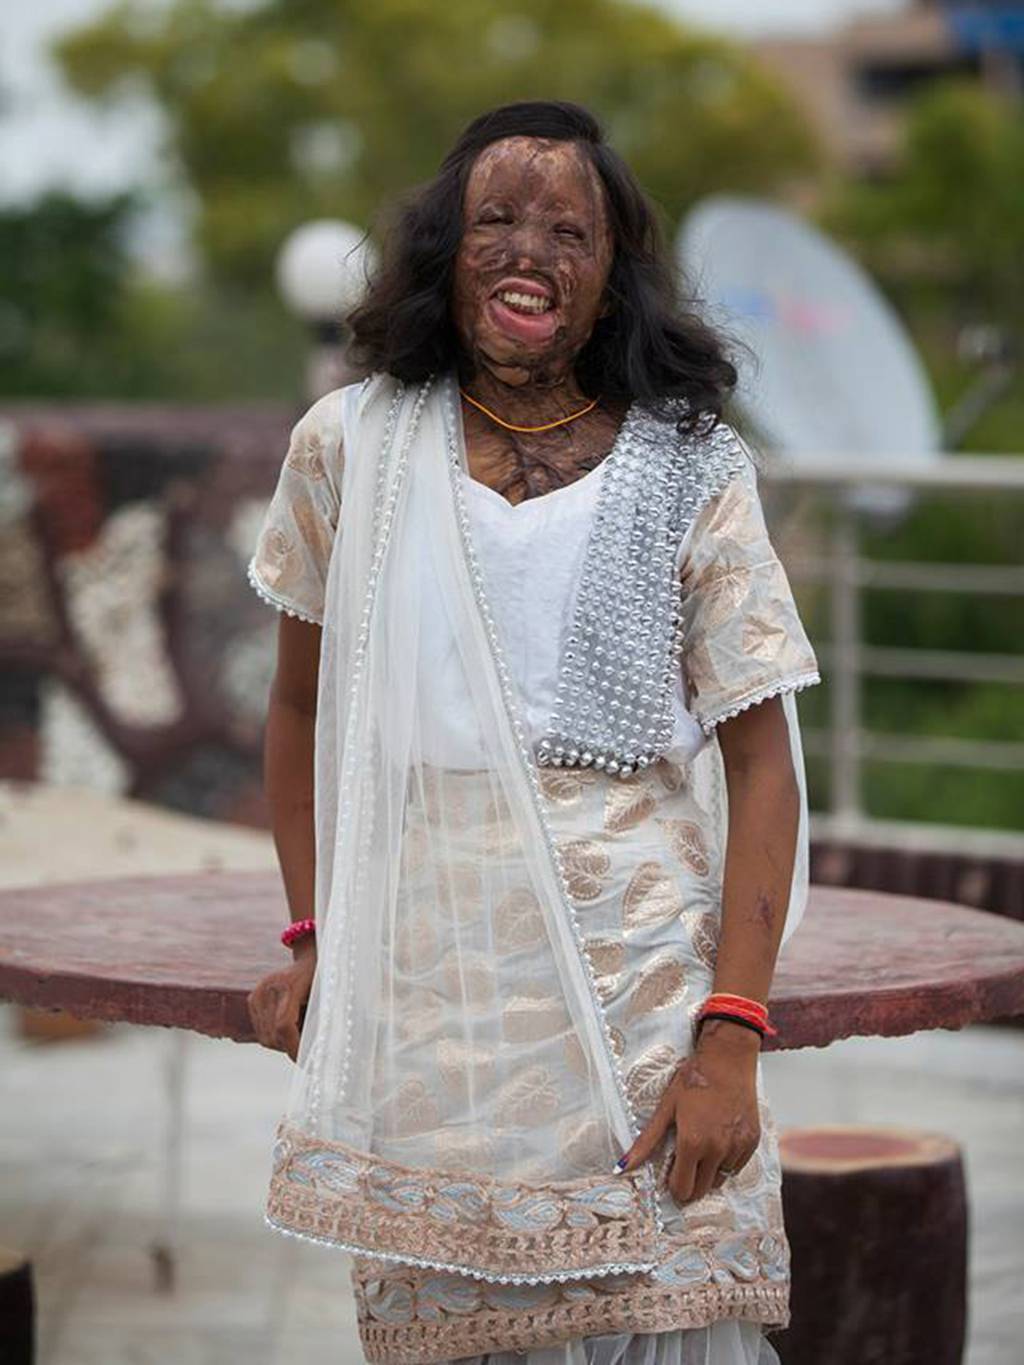 myvoicemyright:   Acid attack survivors in India model new clothing range for powerful